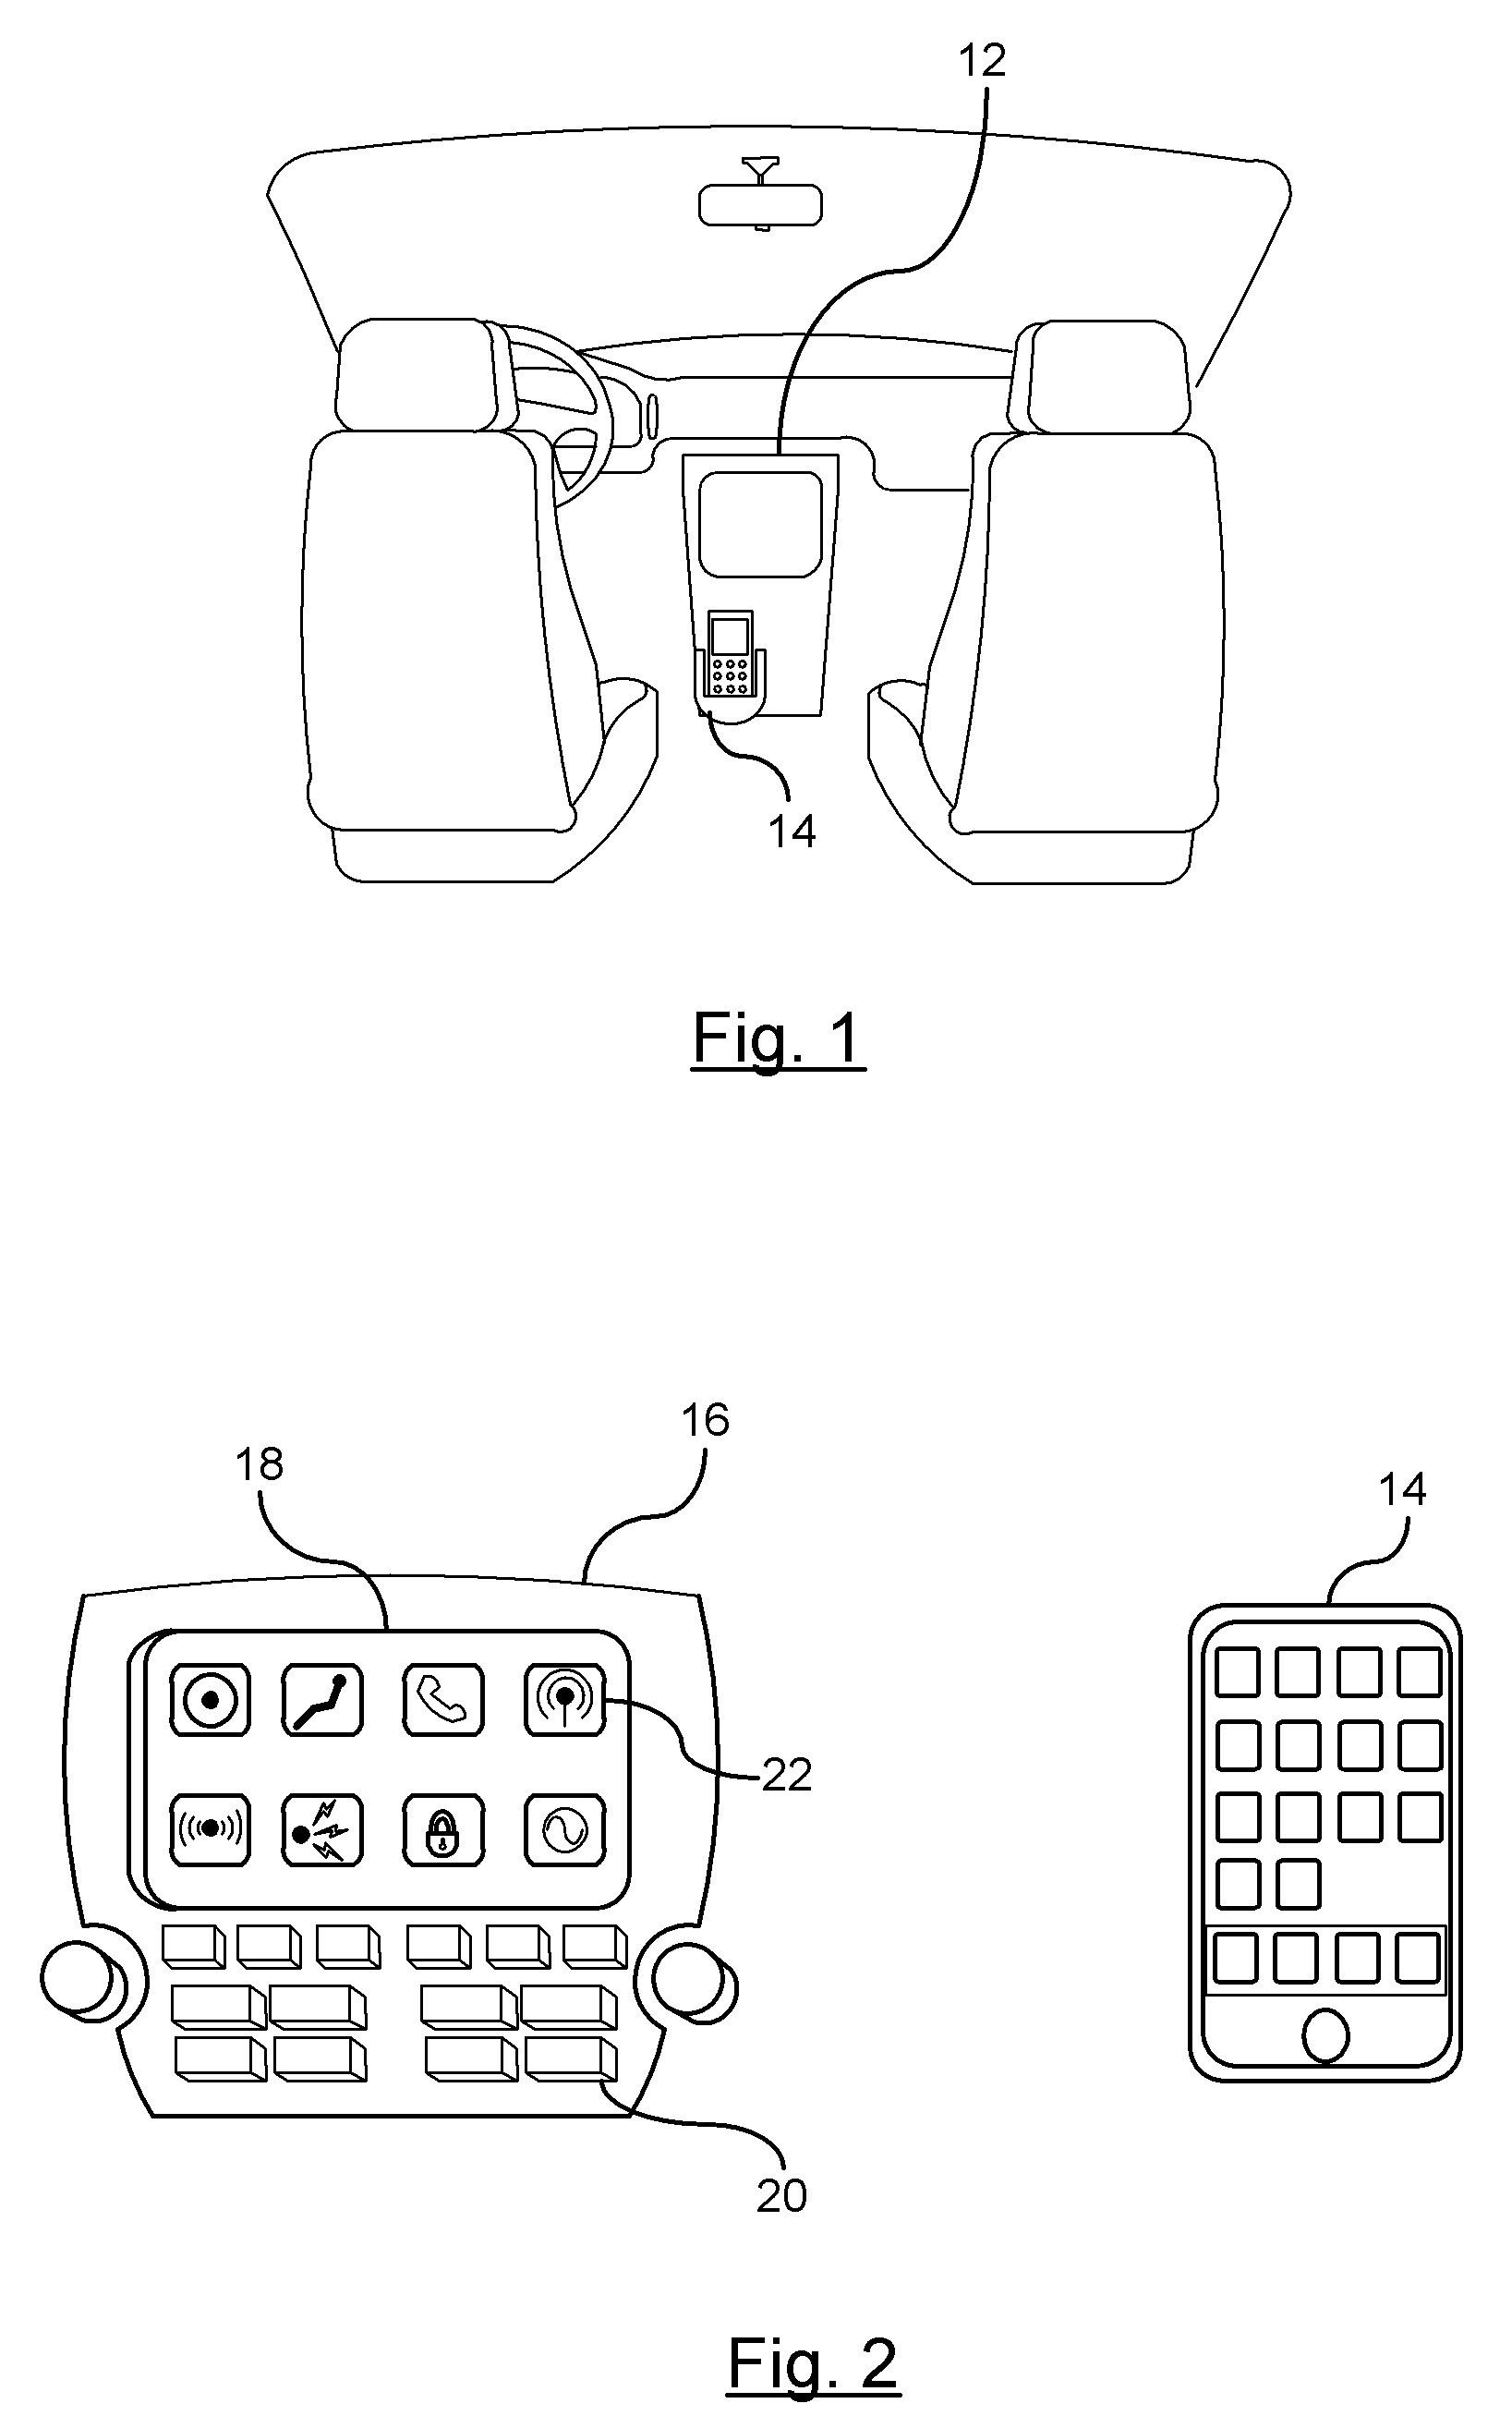 Method and apparatus of using separate reverse channel for user input in mobile device display replication